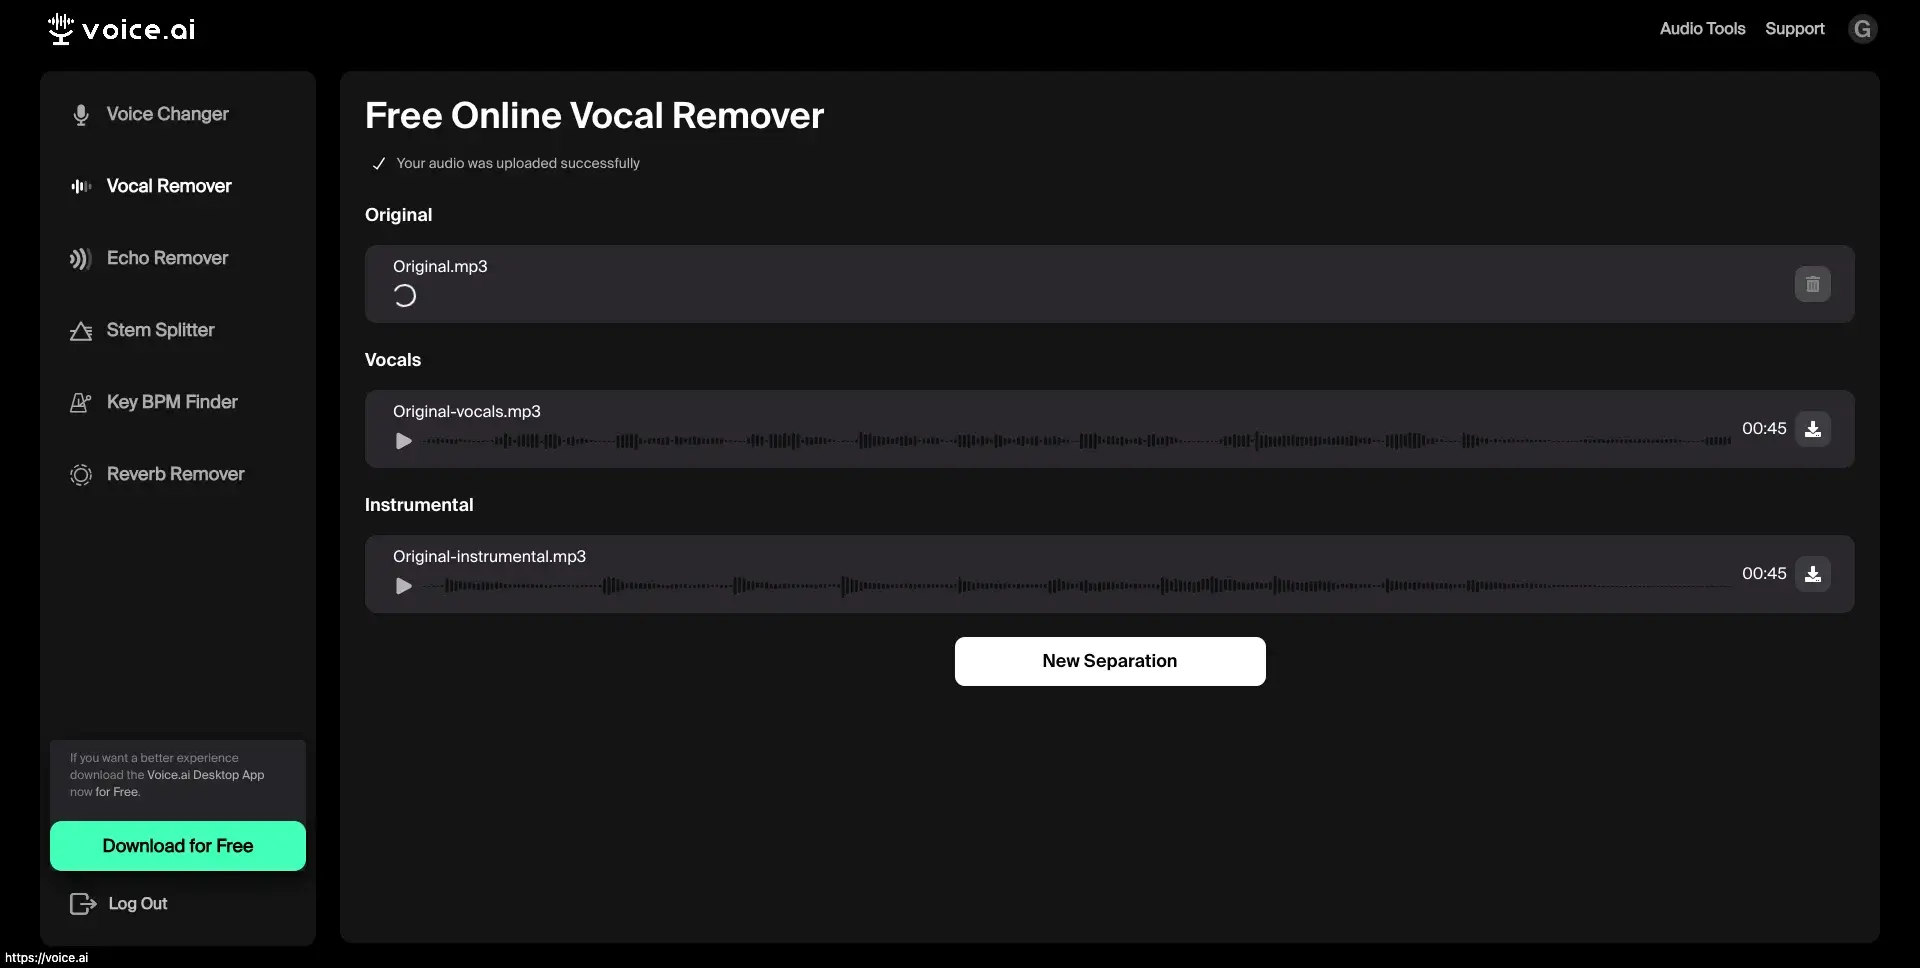 Vocal Remover Results